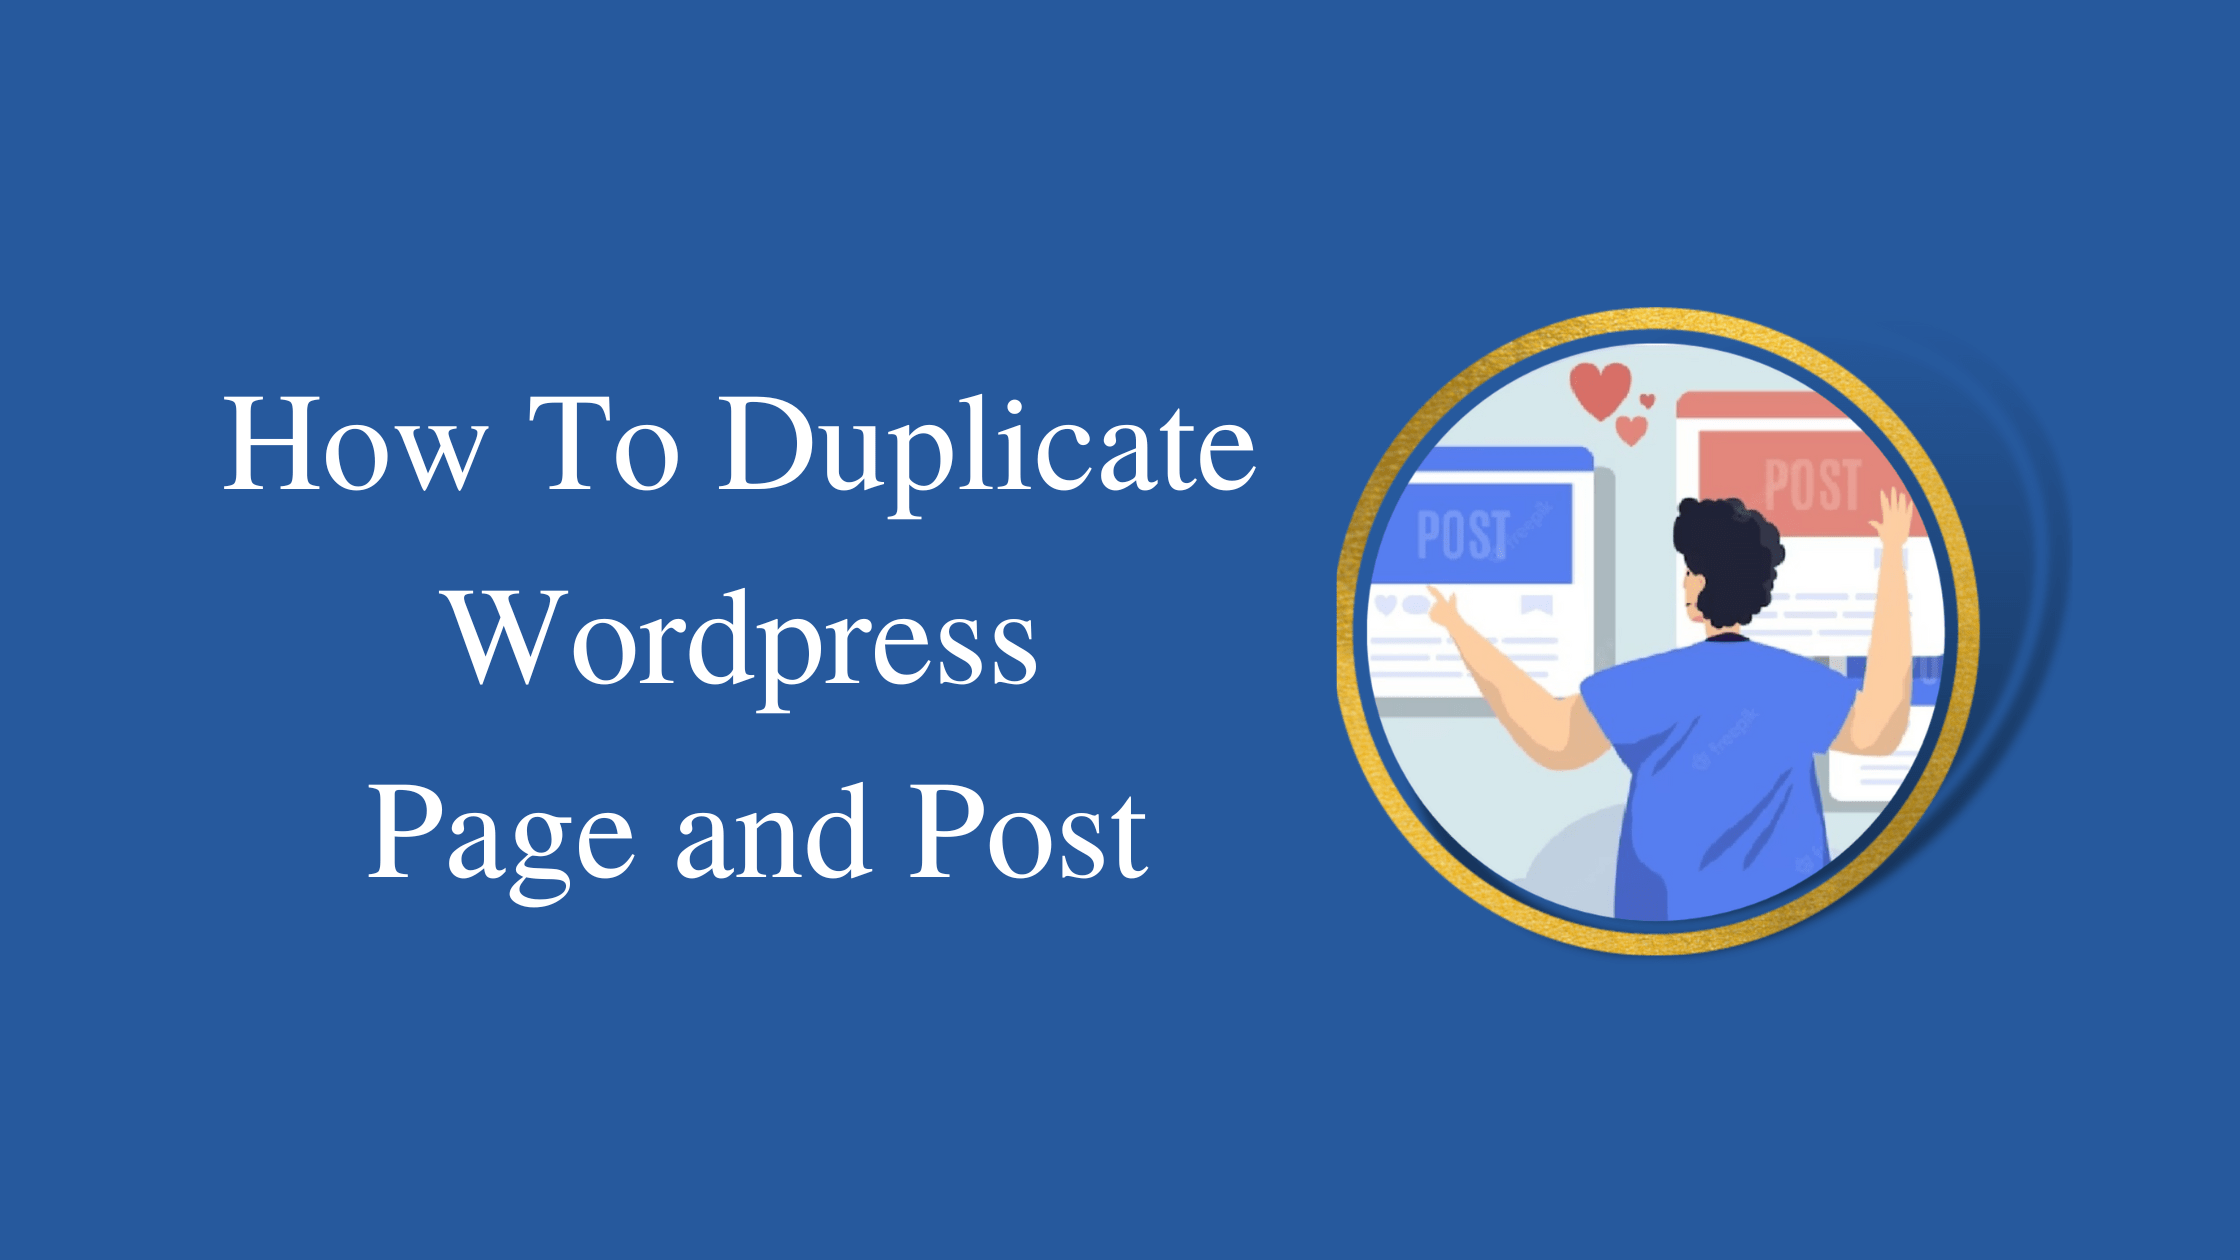 How To Duplicate WordPress Page or Post In Seconds